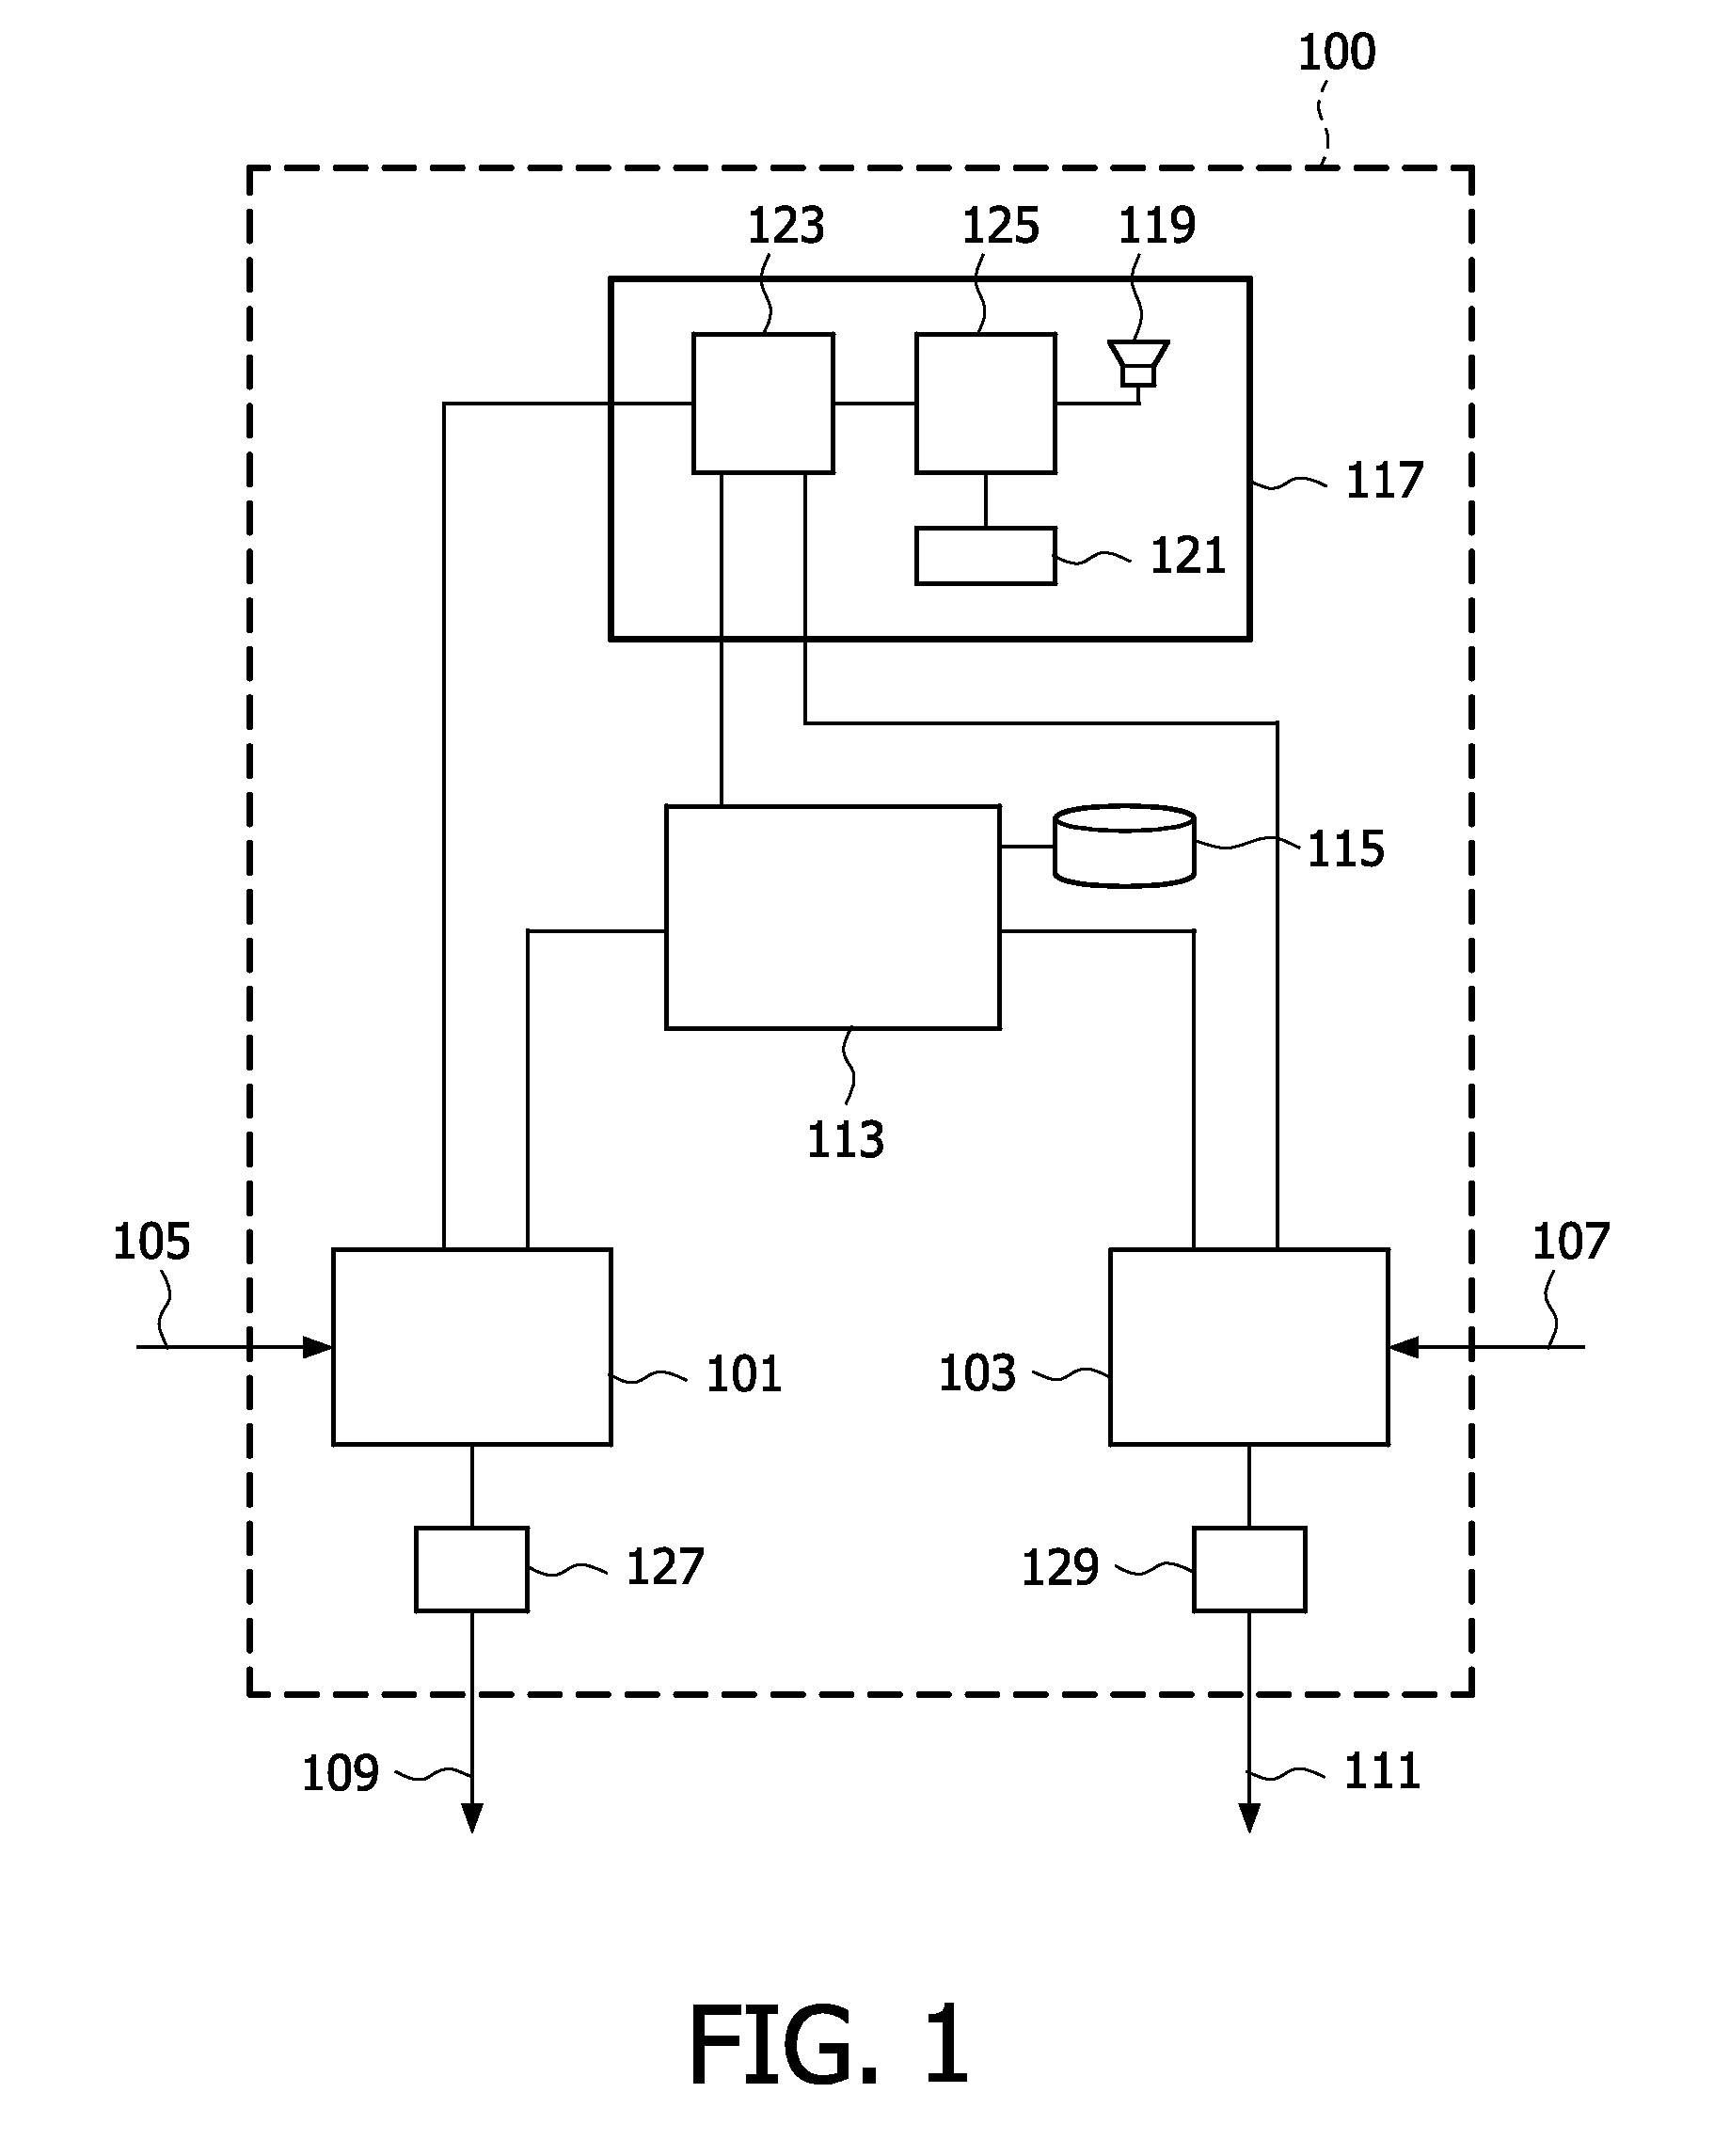 Method and apparatus for dispensing medication